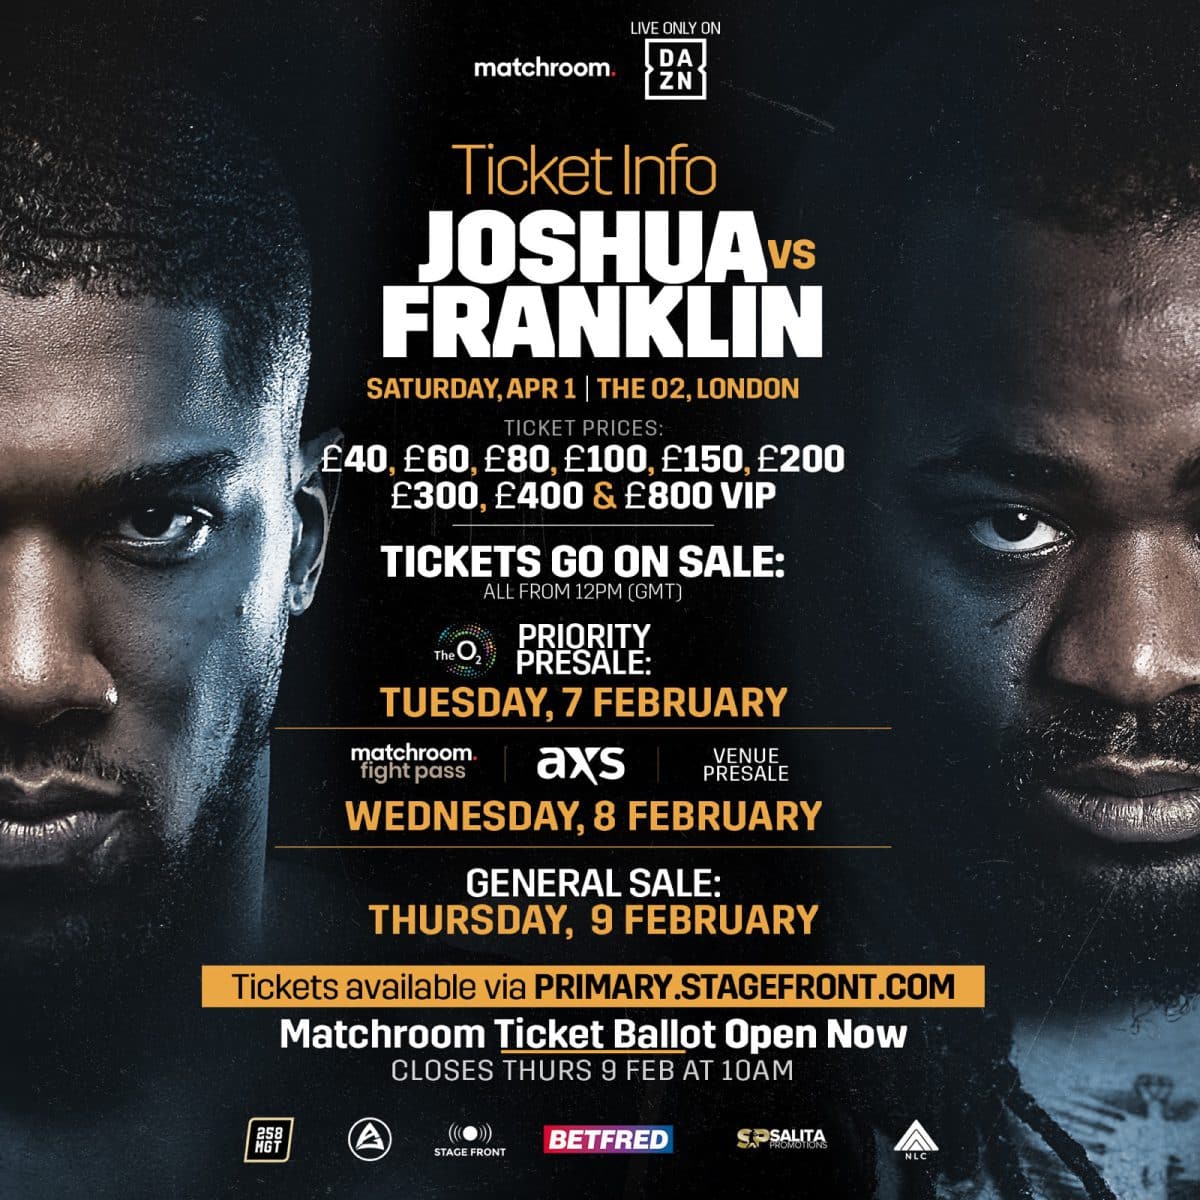 Image: OFFICIAL: Joshua vs Franklin @ The O2 in London on April 1